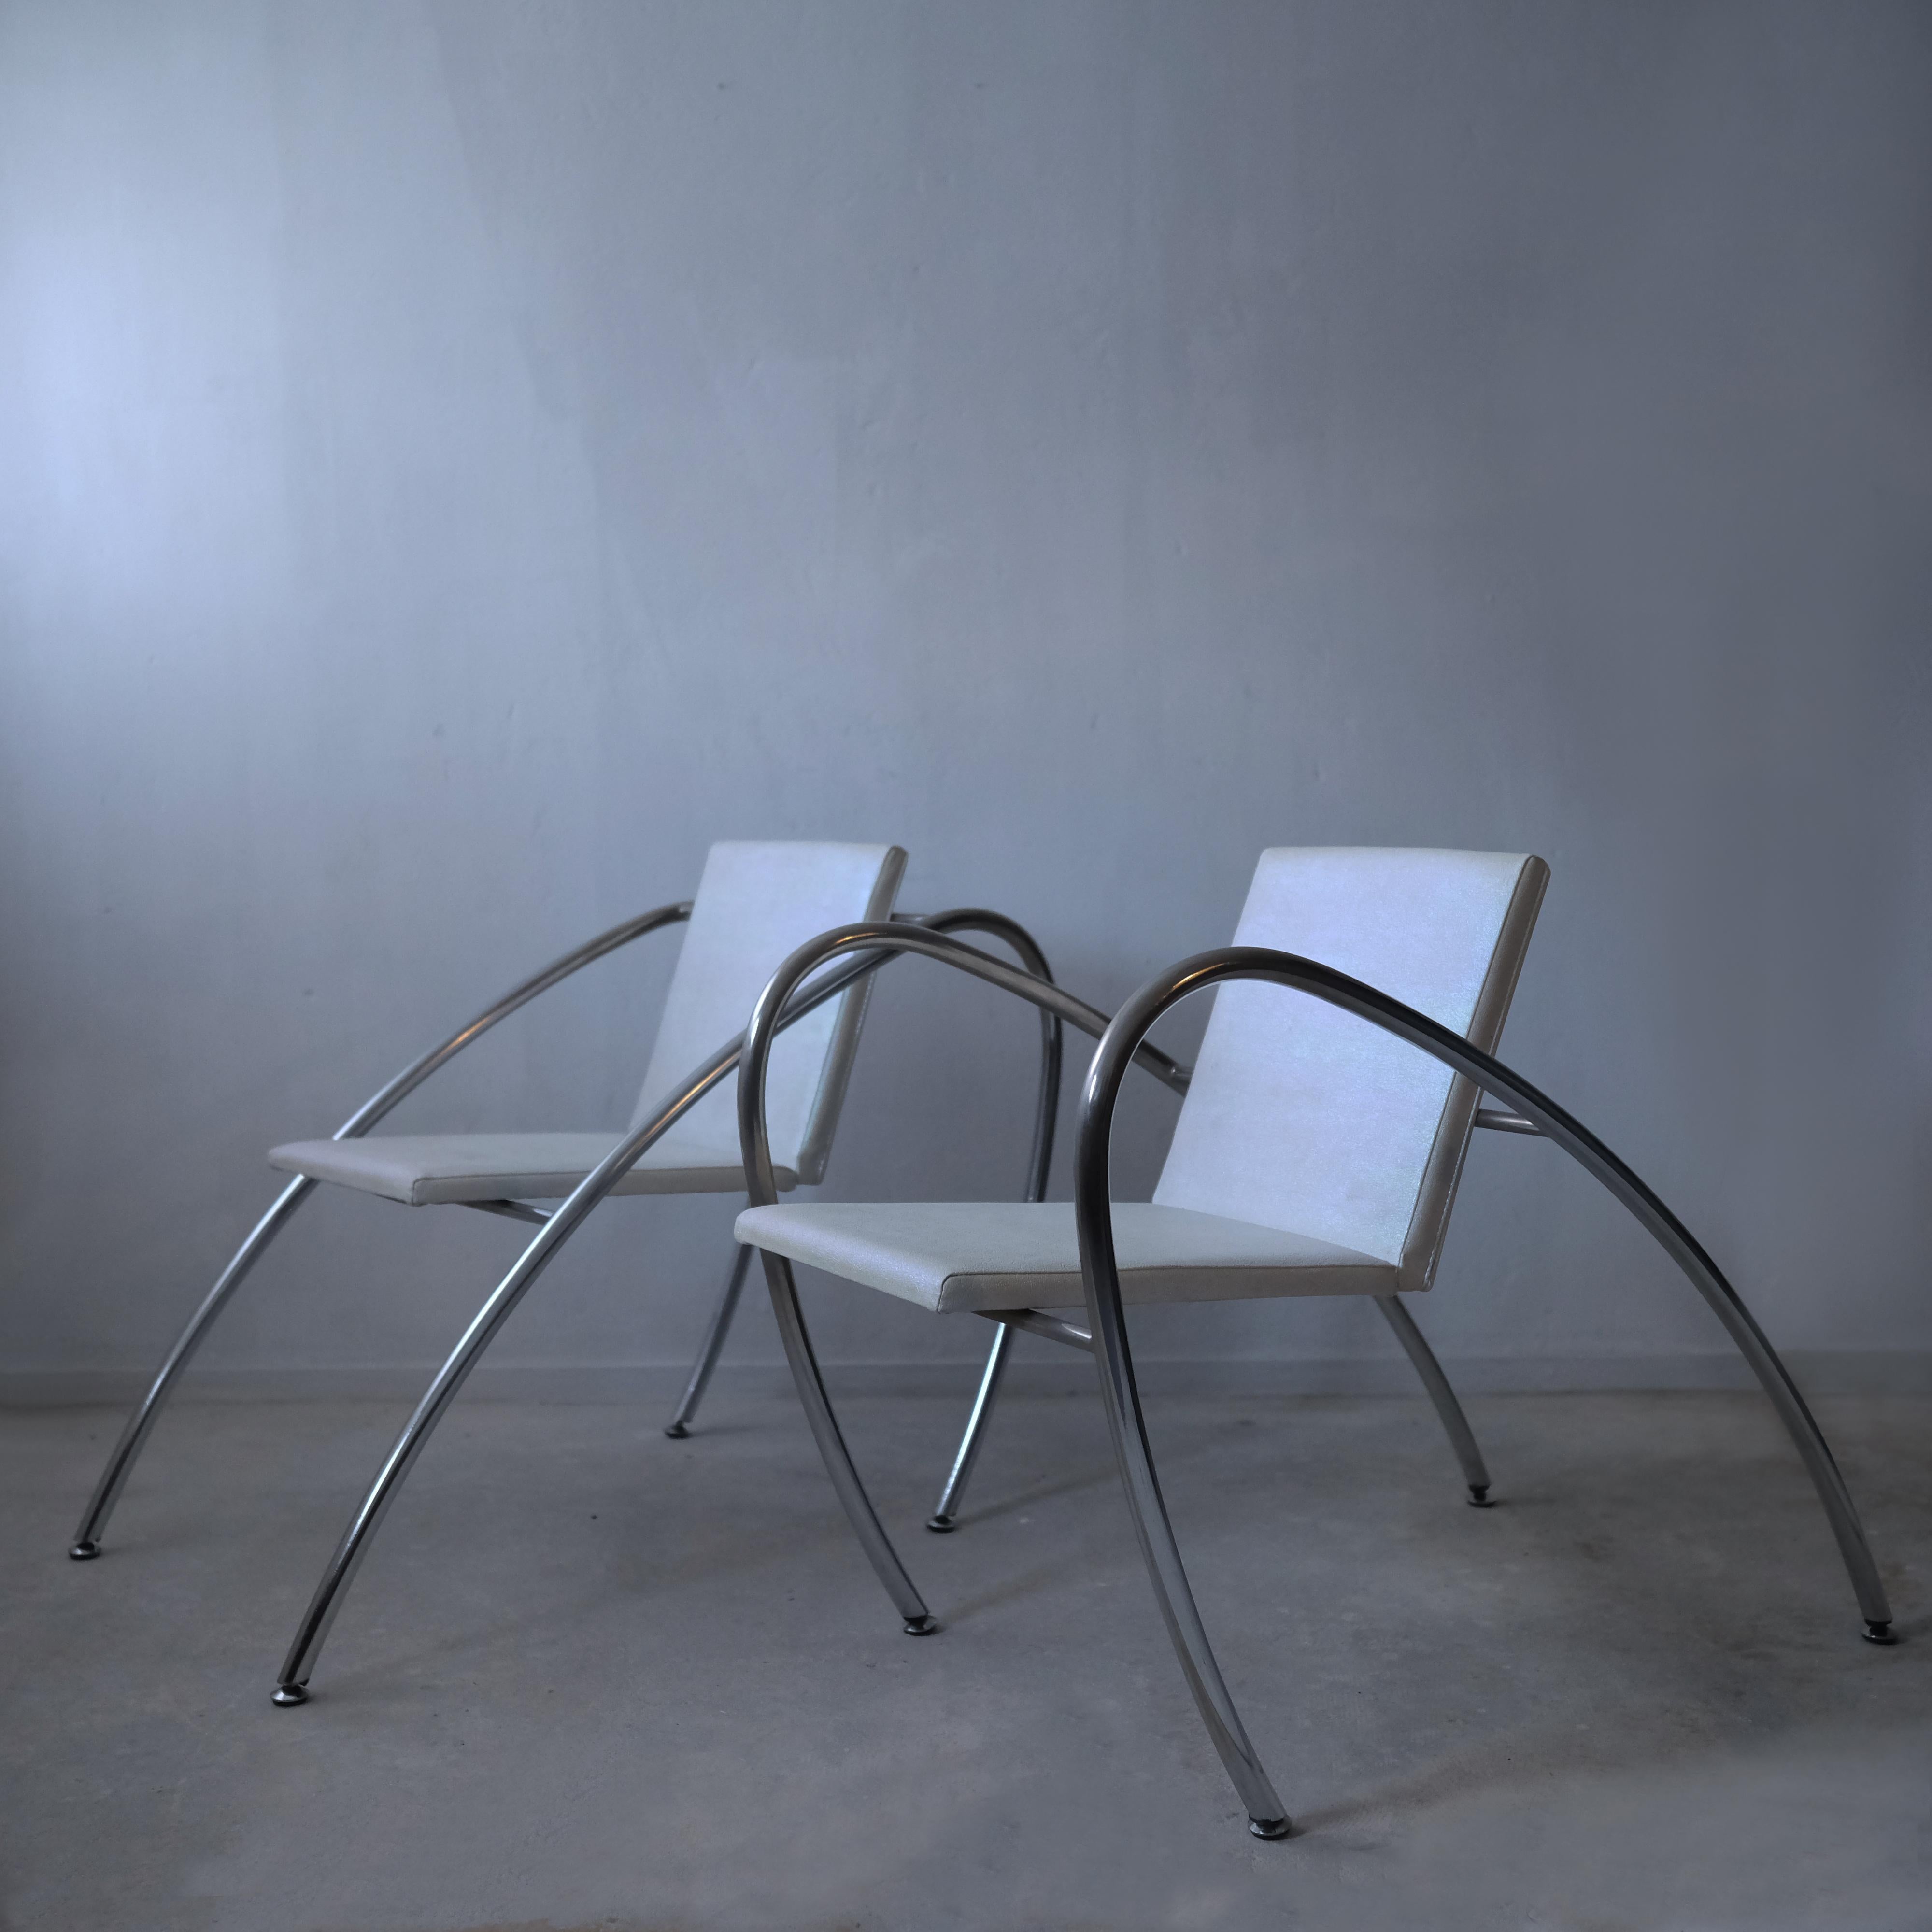 French Alain Domingo and François Scali  pair of Moreno - Marini Chairs For Sale